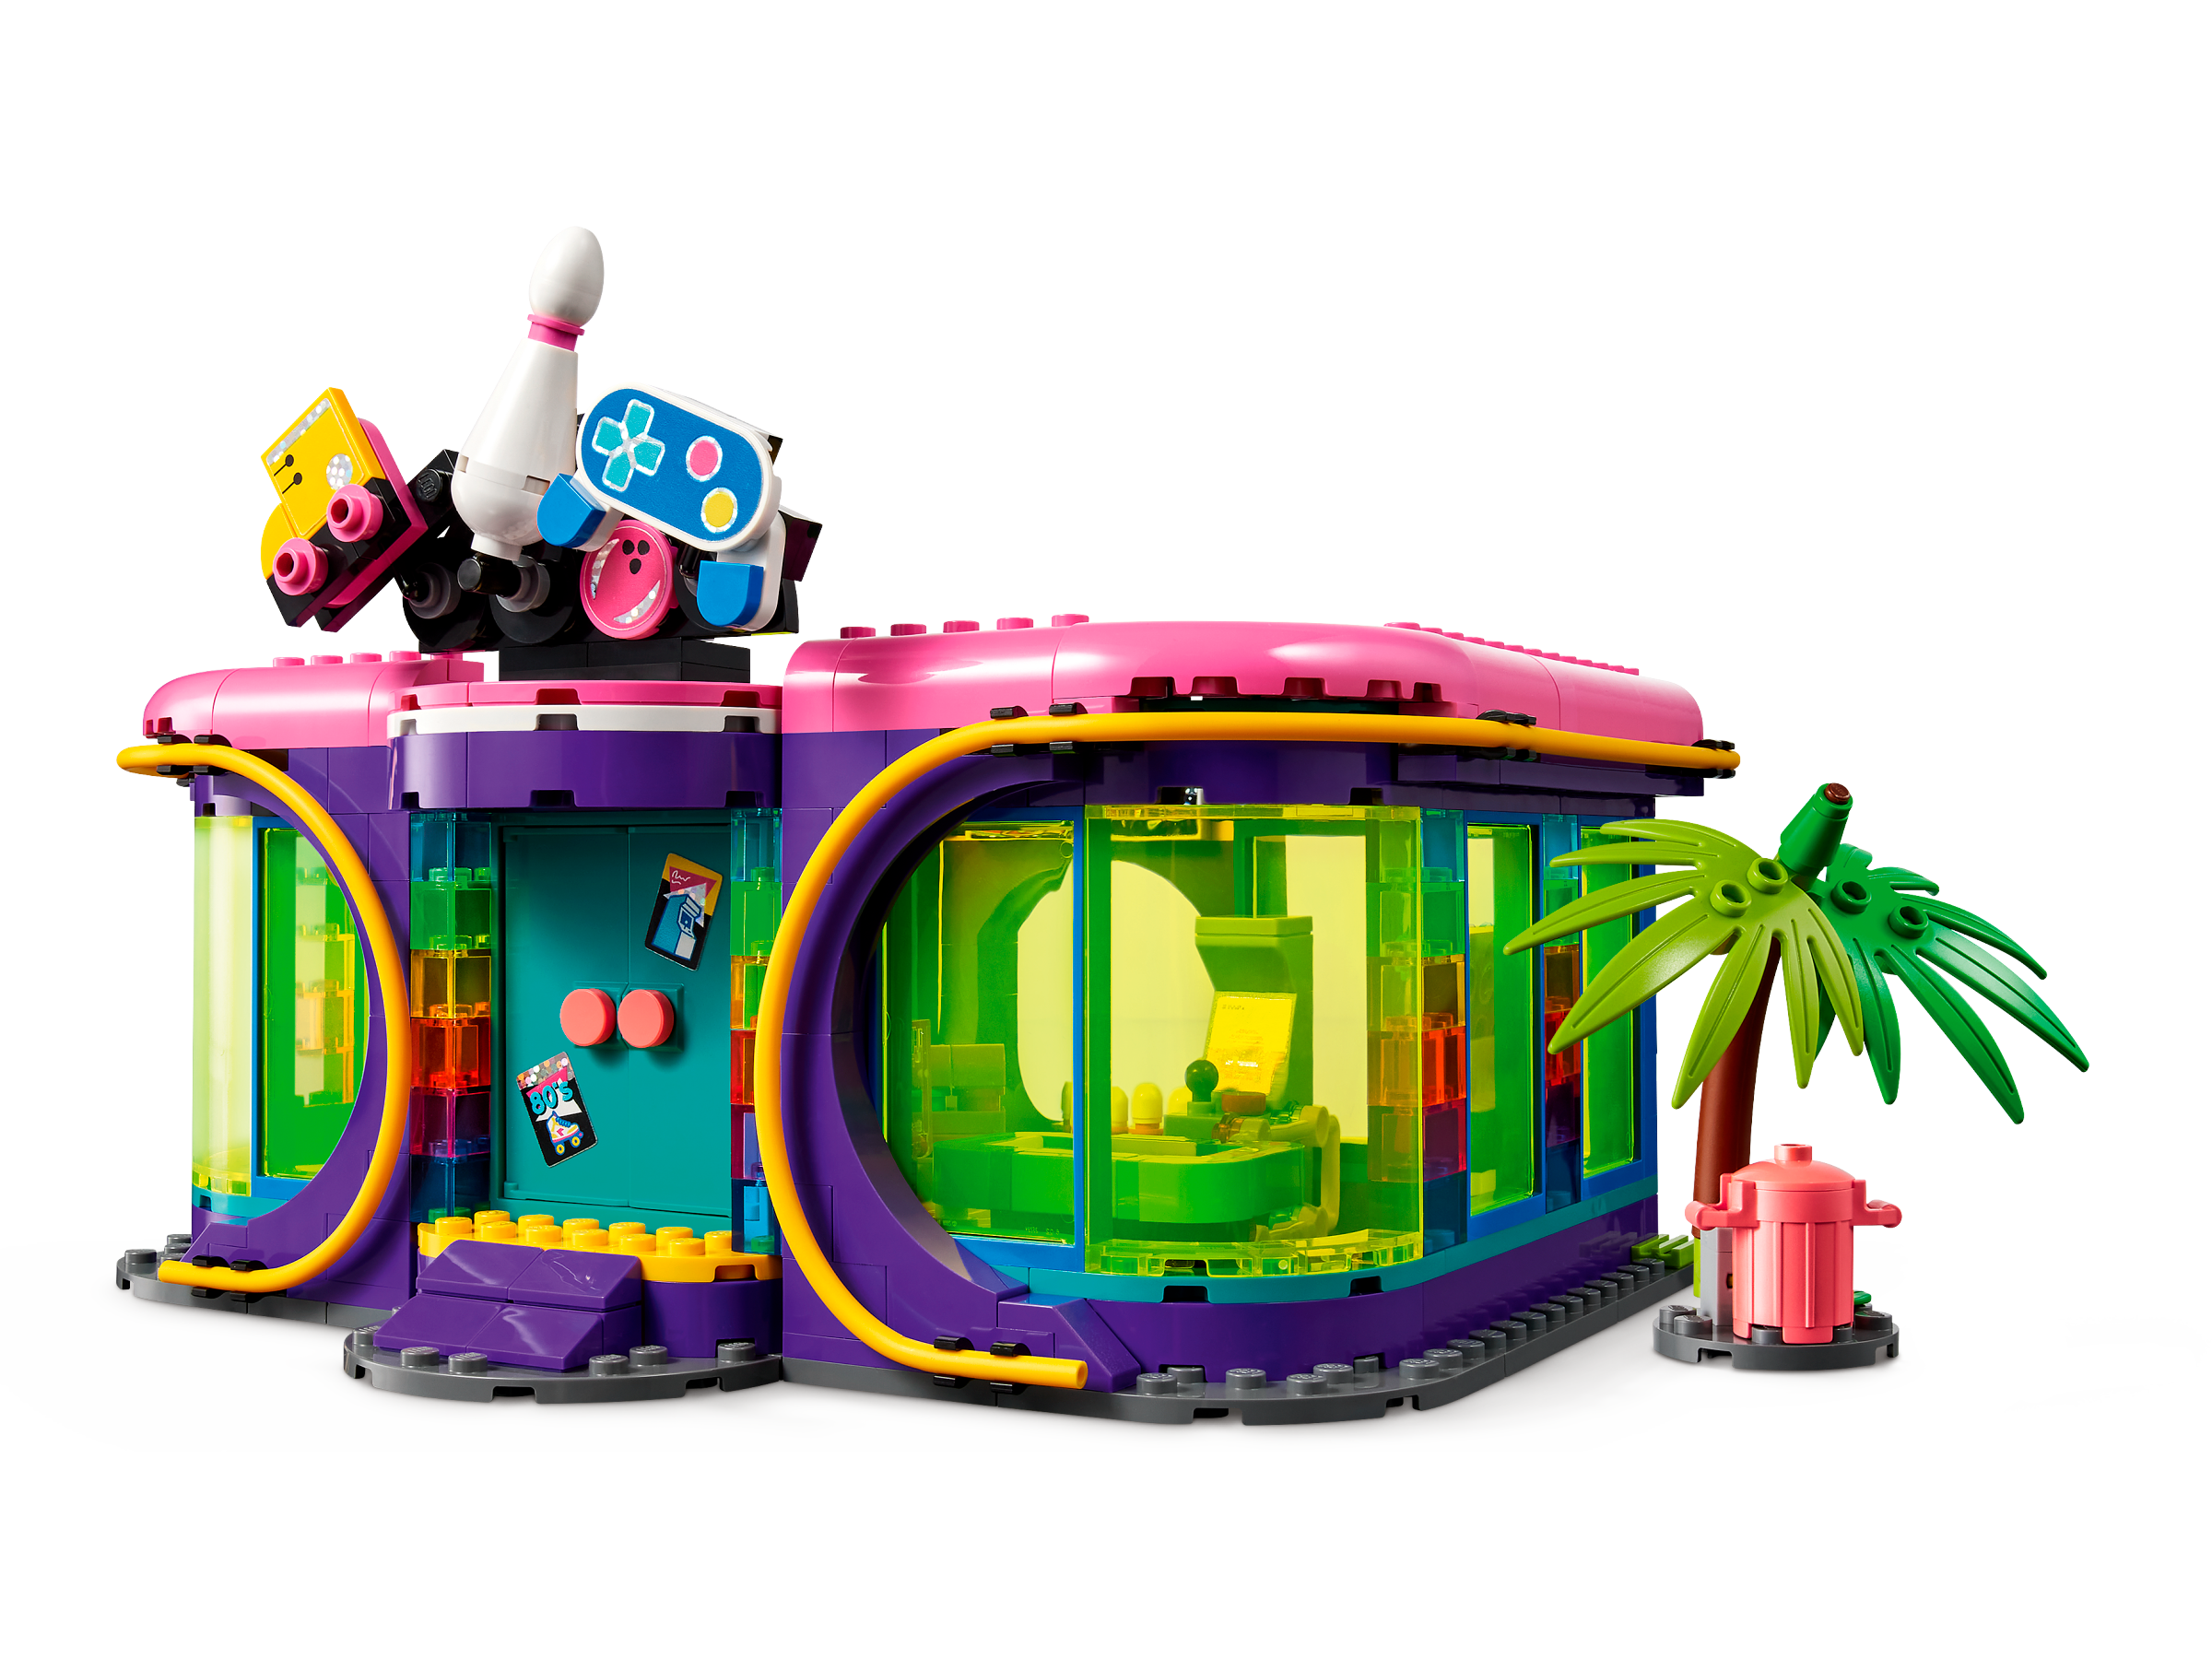 LEGO® Friends 41708 | Roller Arcade online Official Shop US the Disco | at Buy